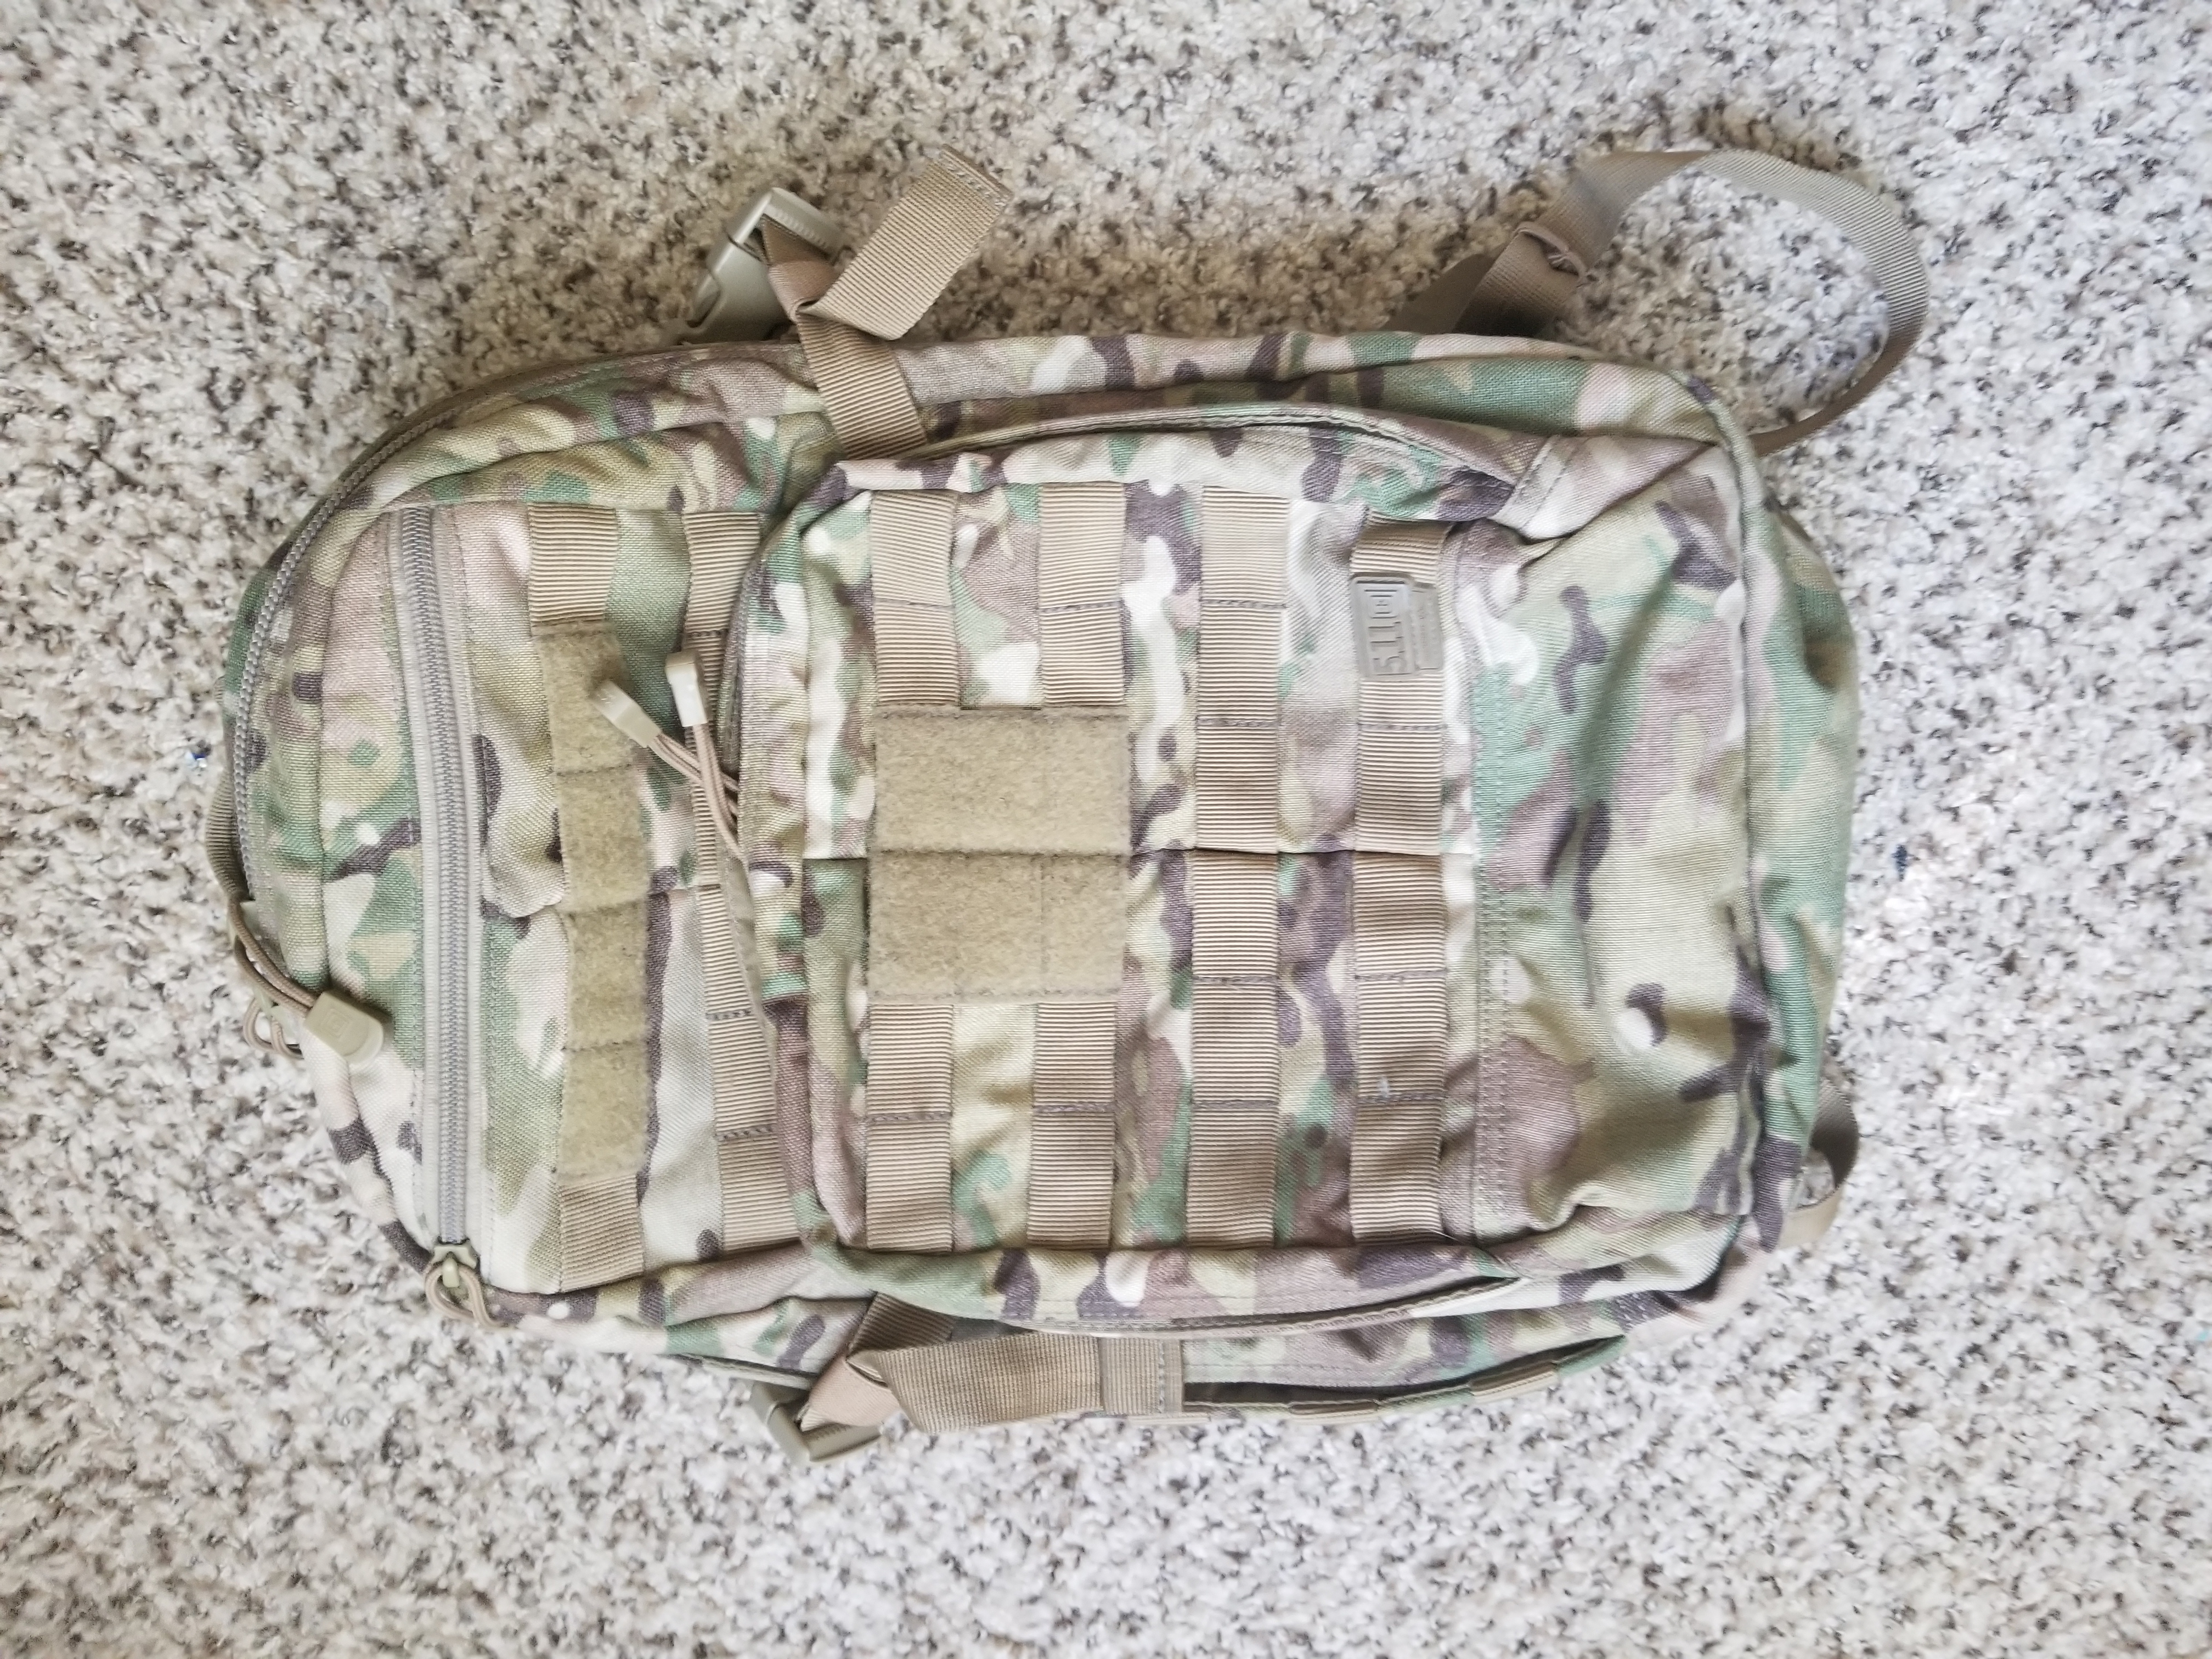 5.11 RUSH 12 2.0 BACKPACK – Tactical Products Canada